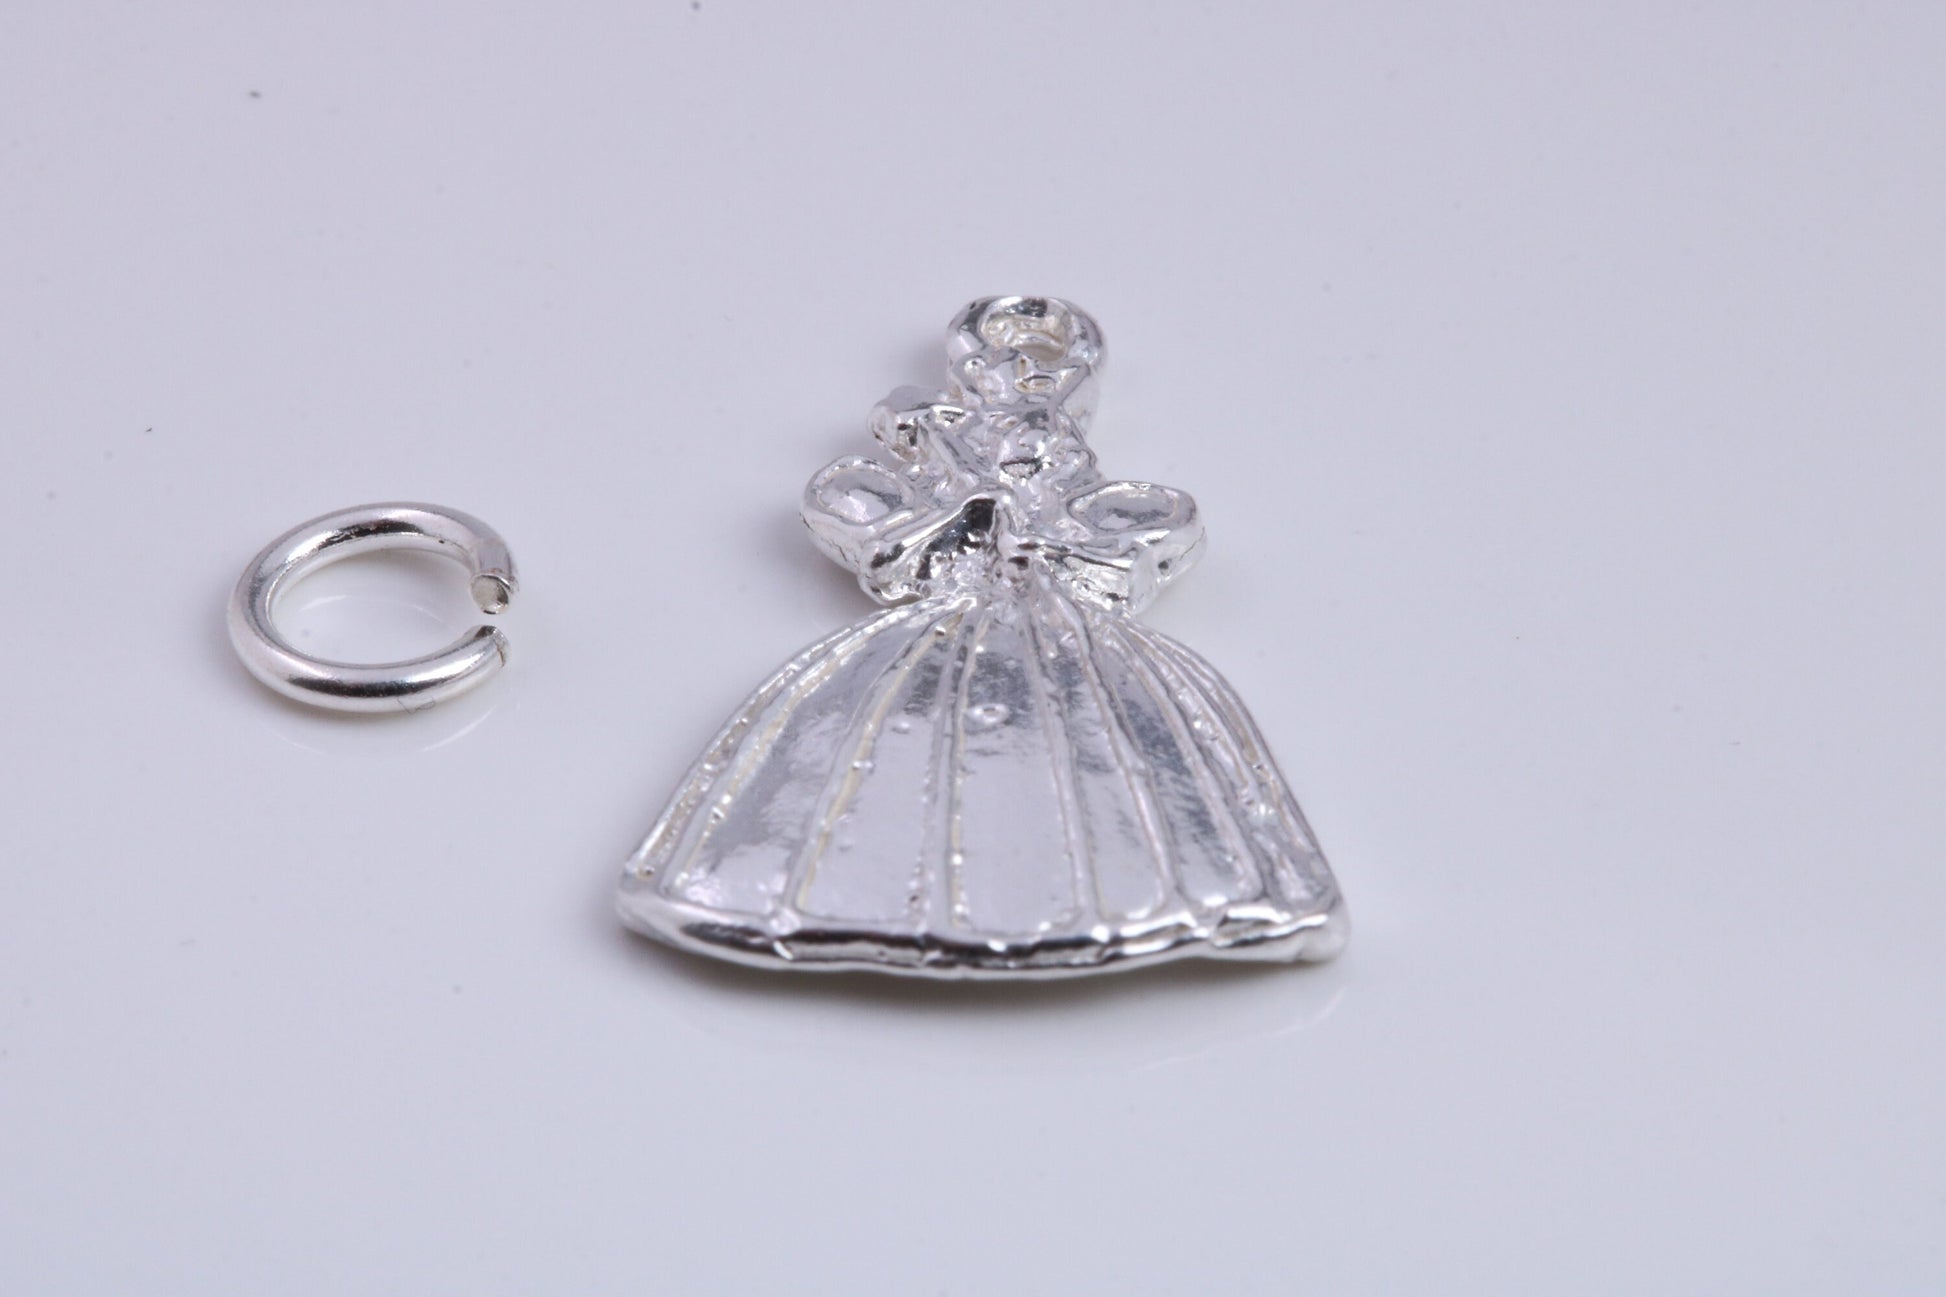 Fairy God Mother Charm, Traditional Charm, Made from Solid 925 Grade Sterling Silver, Complete with Attachment Link